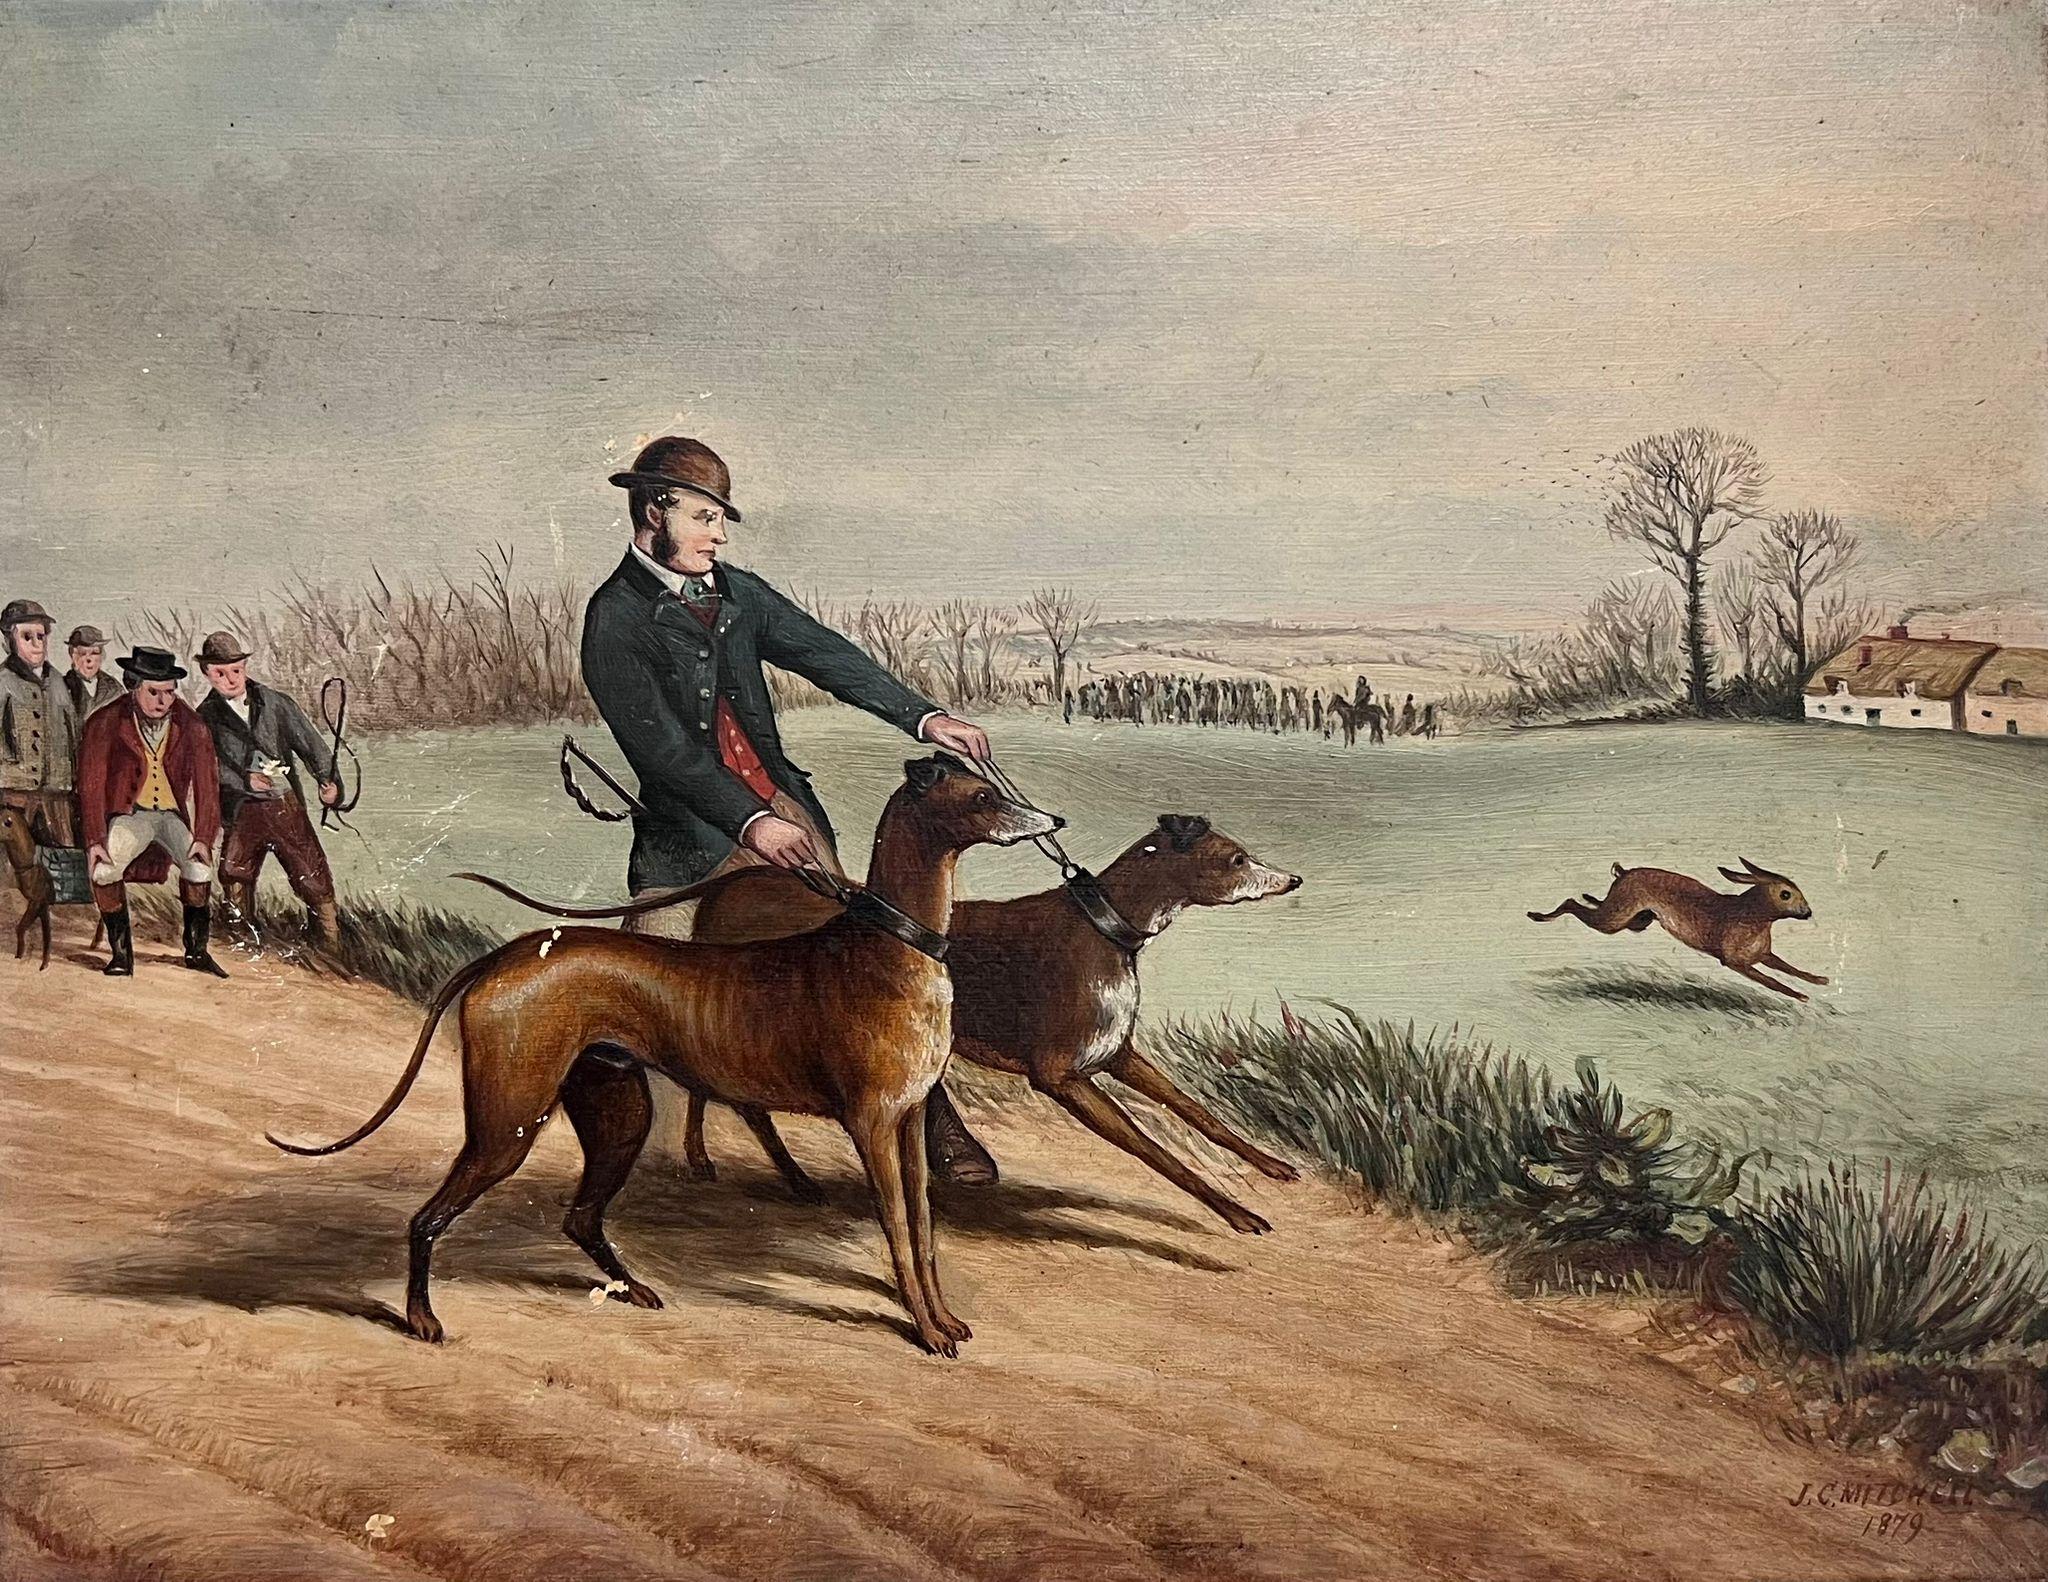 J. C Mitchell Figurative Painting - 1870's British Sporting Art Oil Painting Hare Coursing with Dogs, signed dated